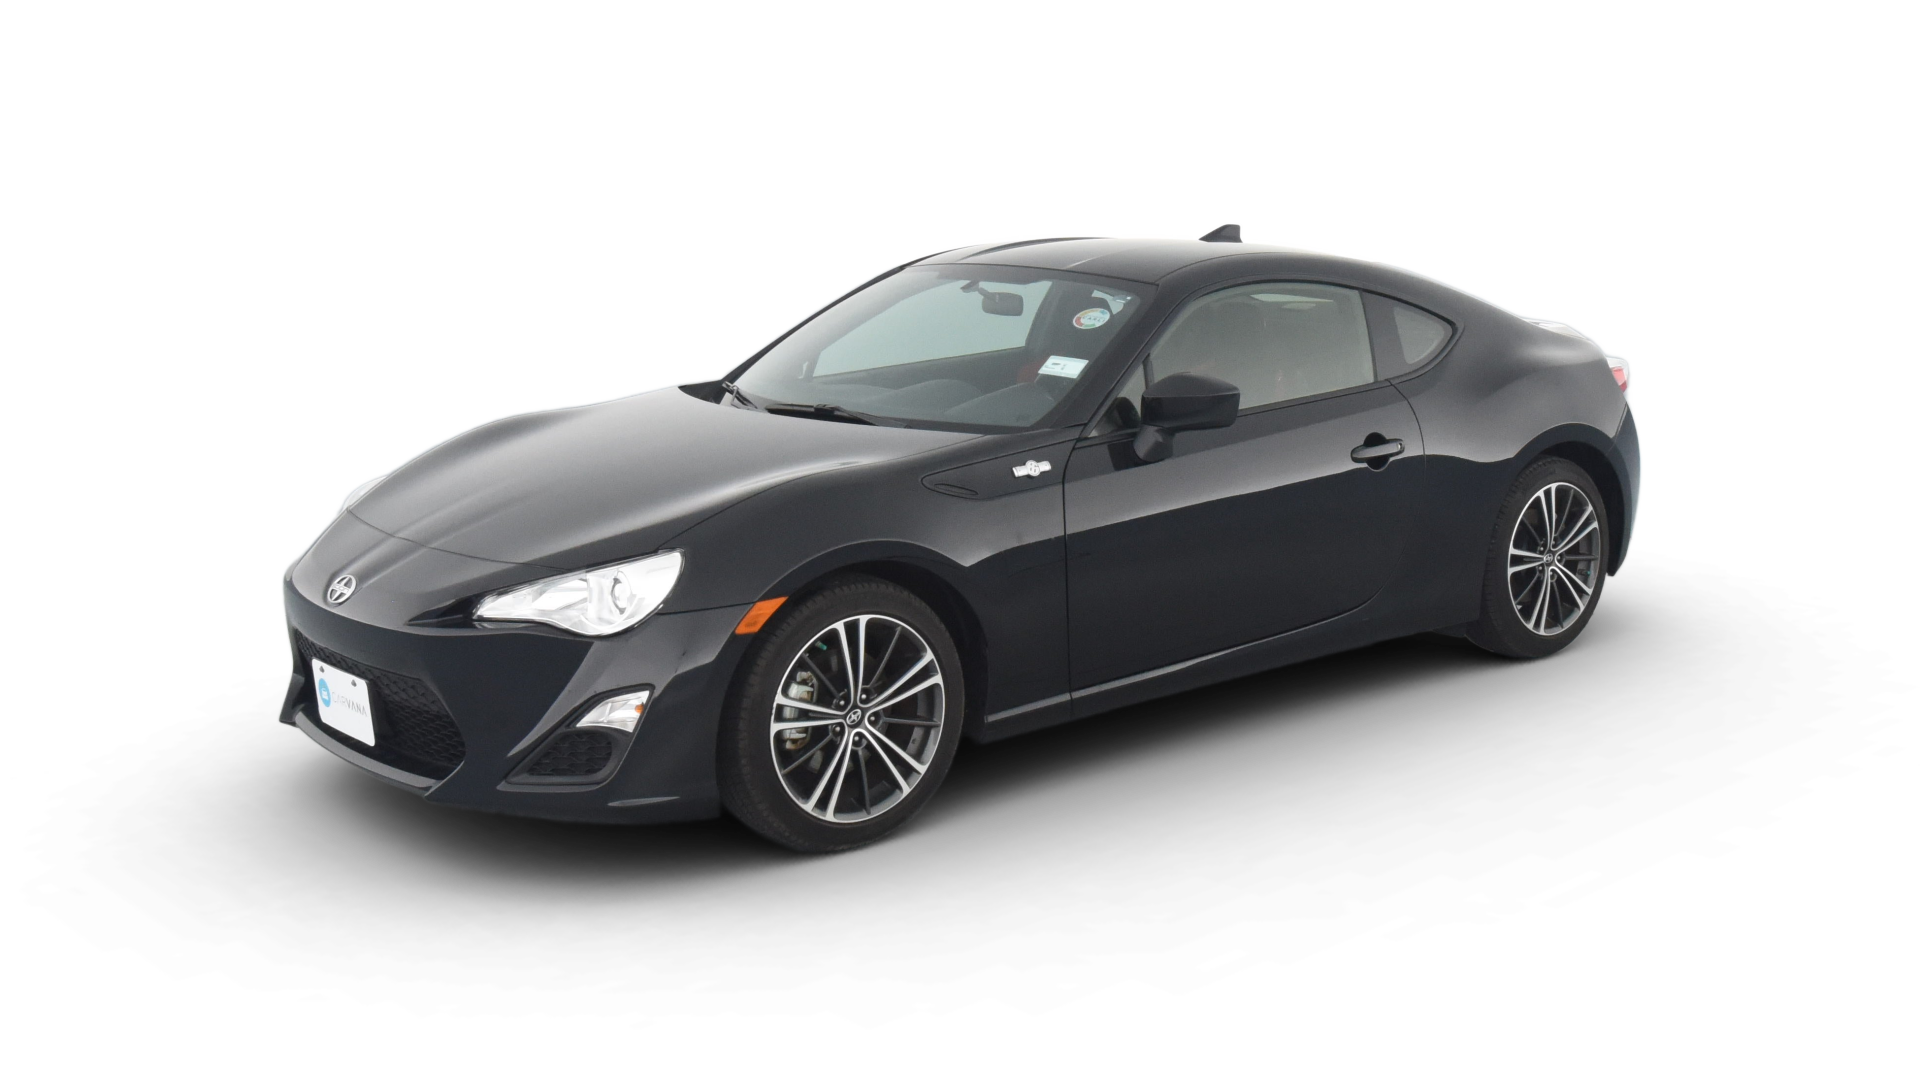 Used Scion FR-S For Sale Online | Carvana